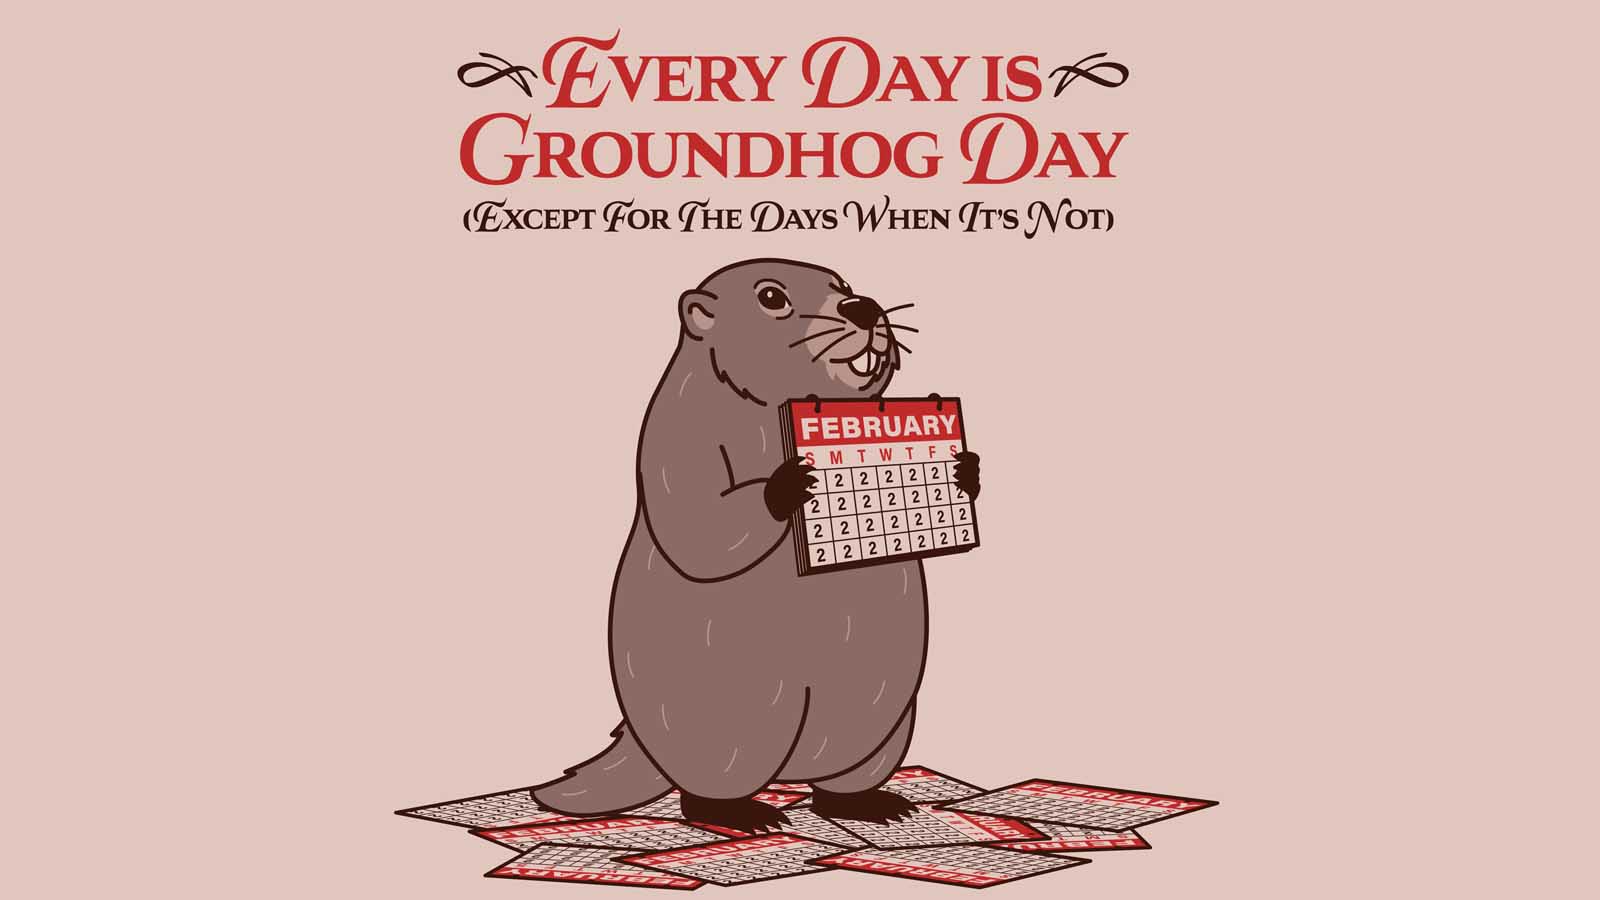 Every Day Is Groundhog Day (Except for the Days When It’s Not) cover art